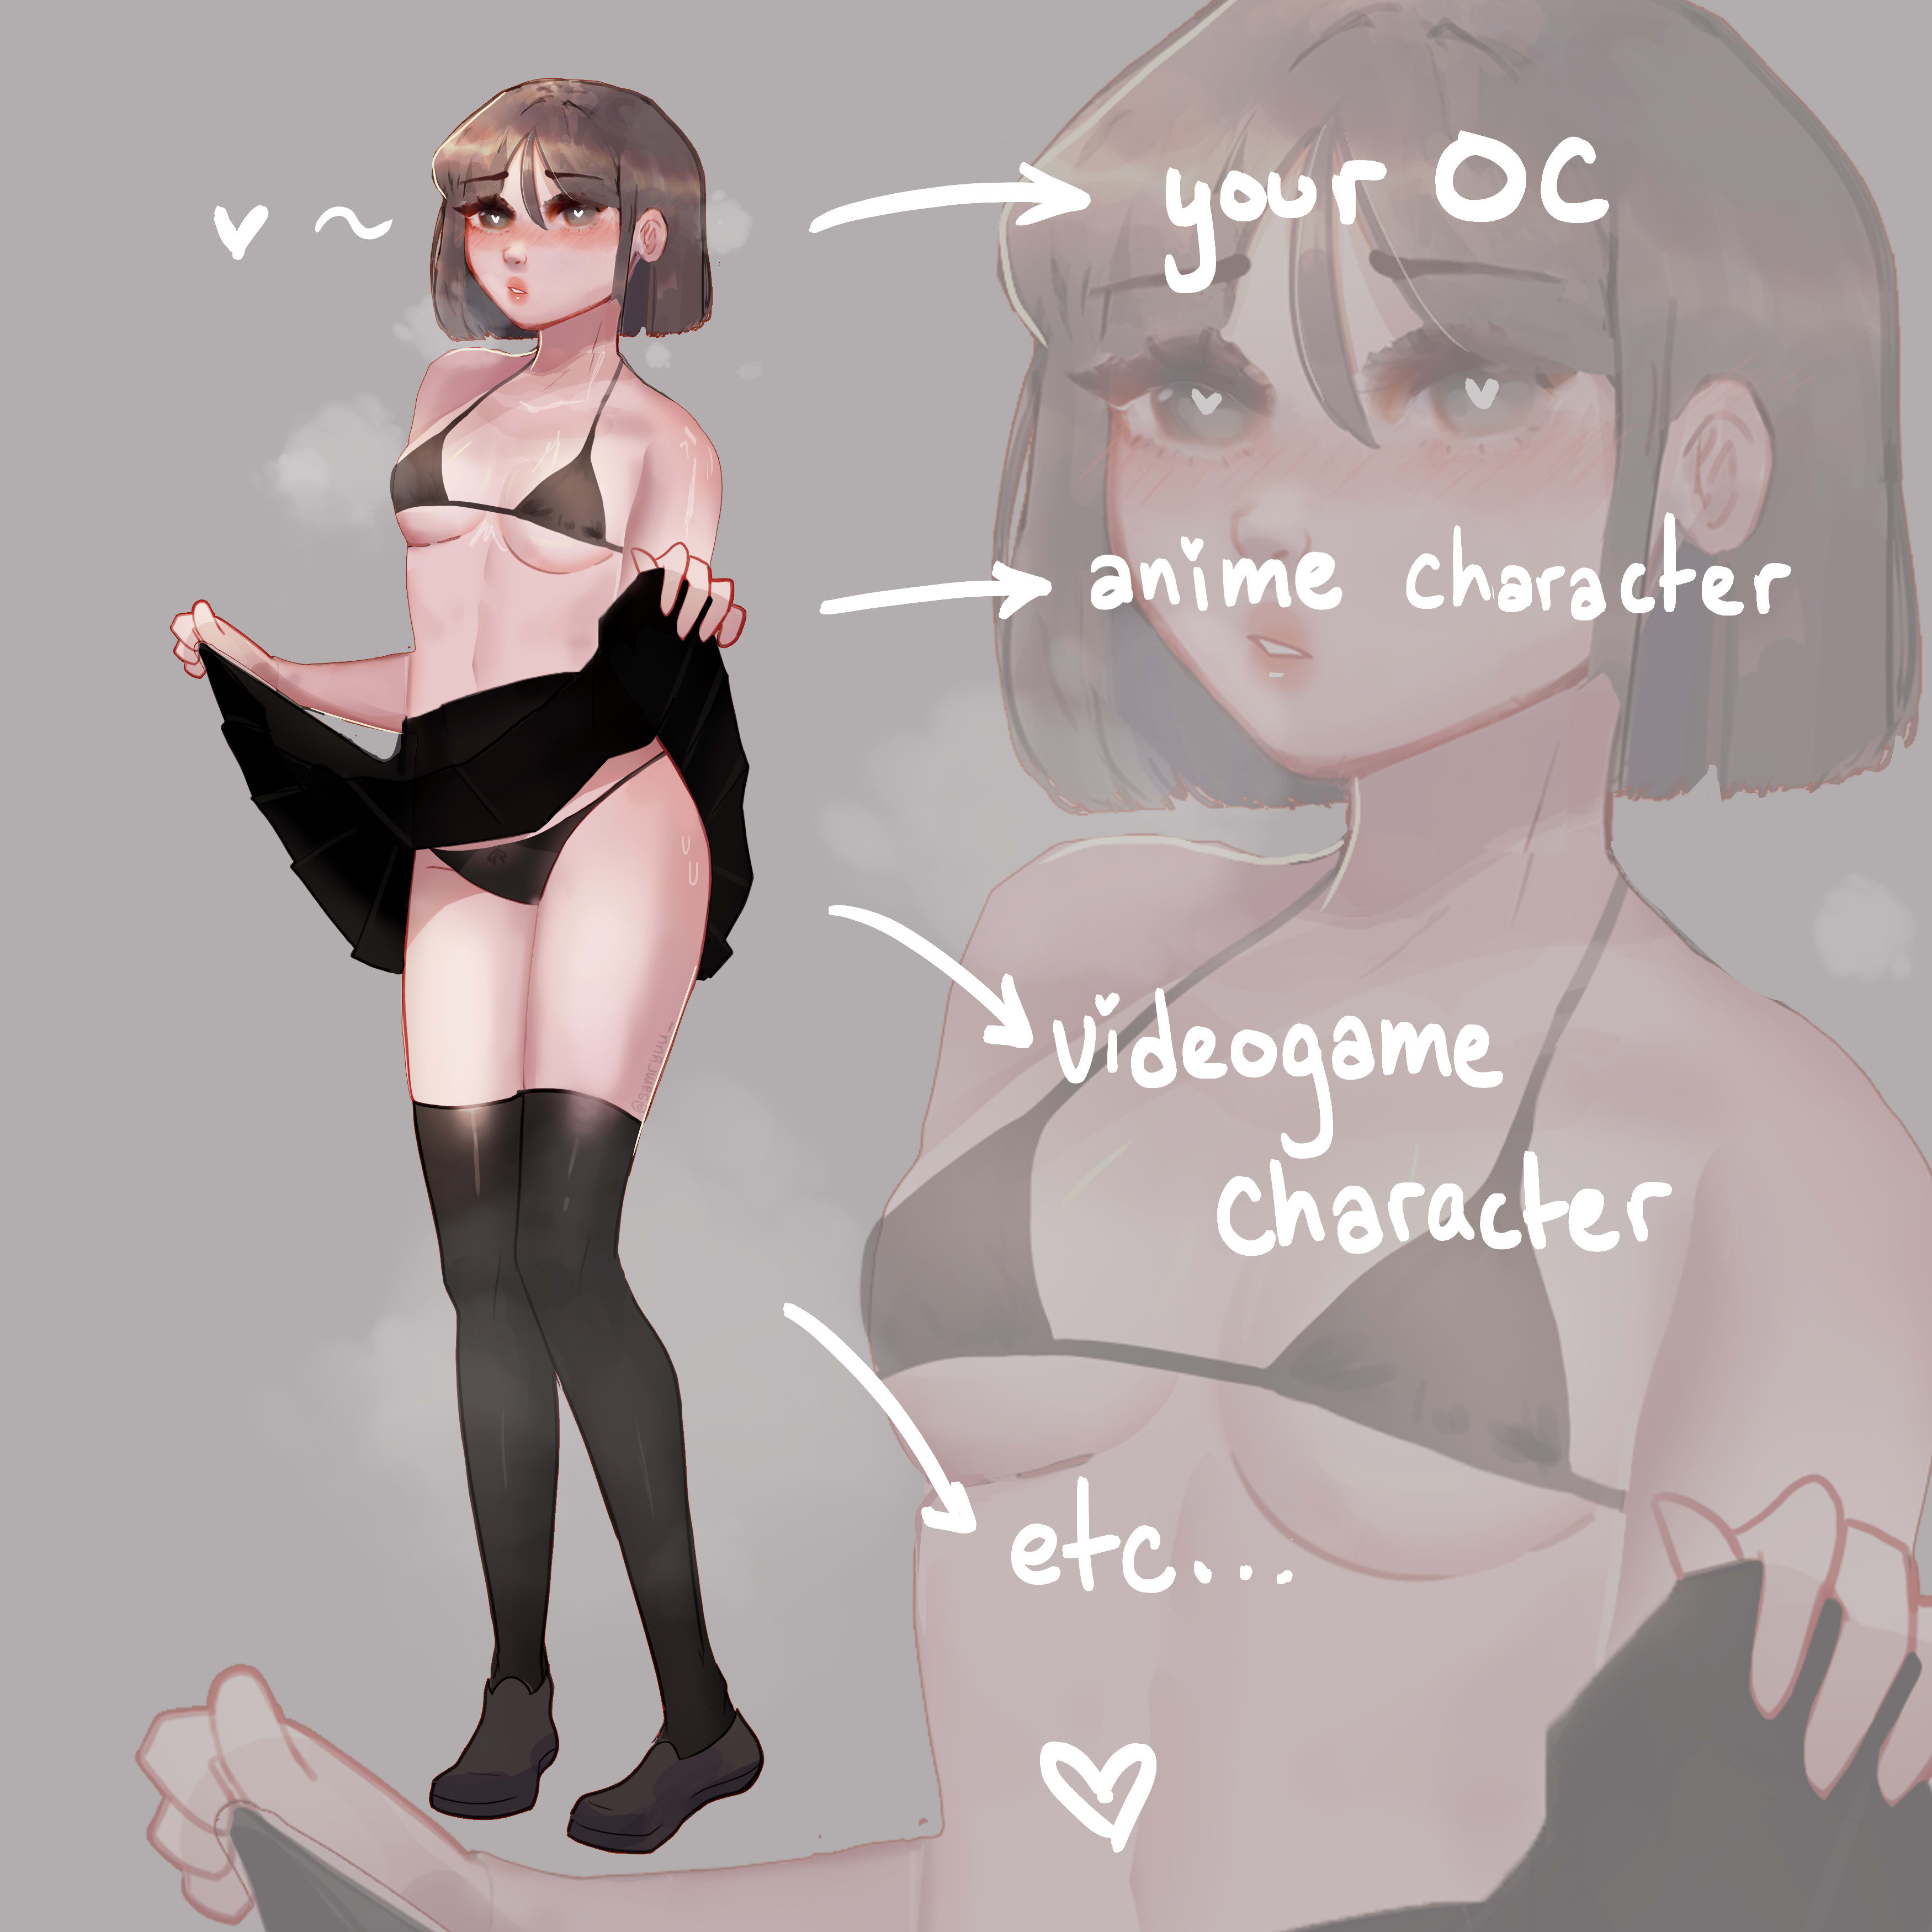 I will do anime, fan art, oc,nsfw more - Artists&Clients